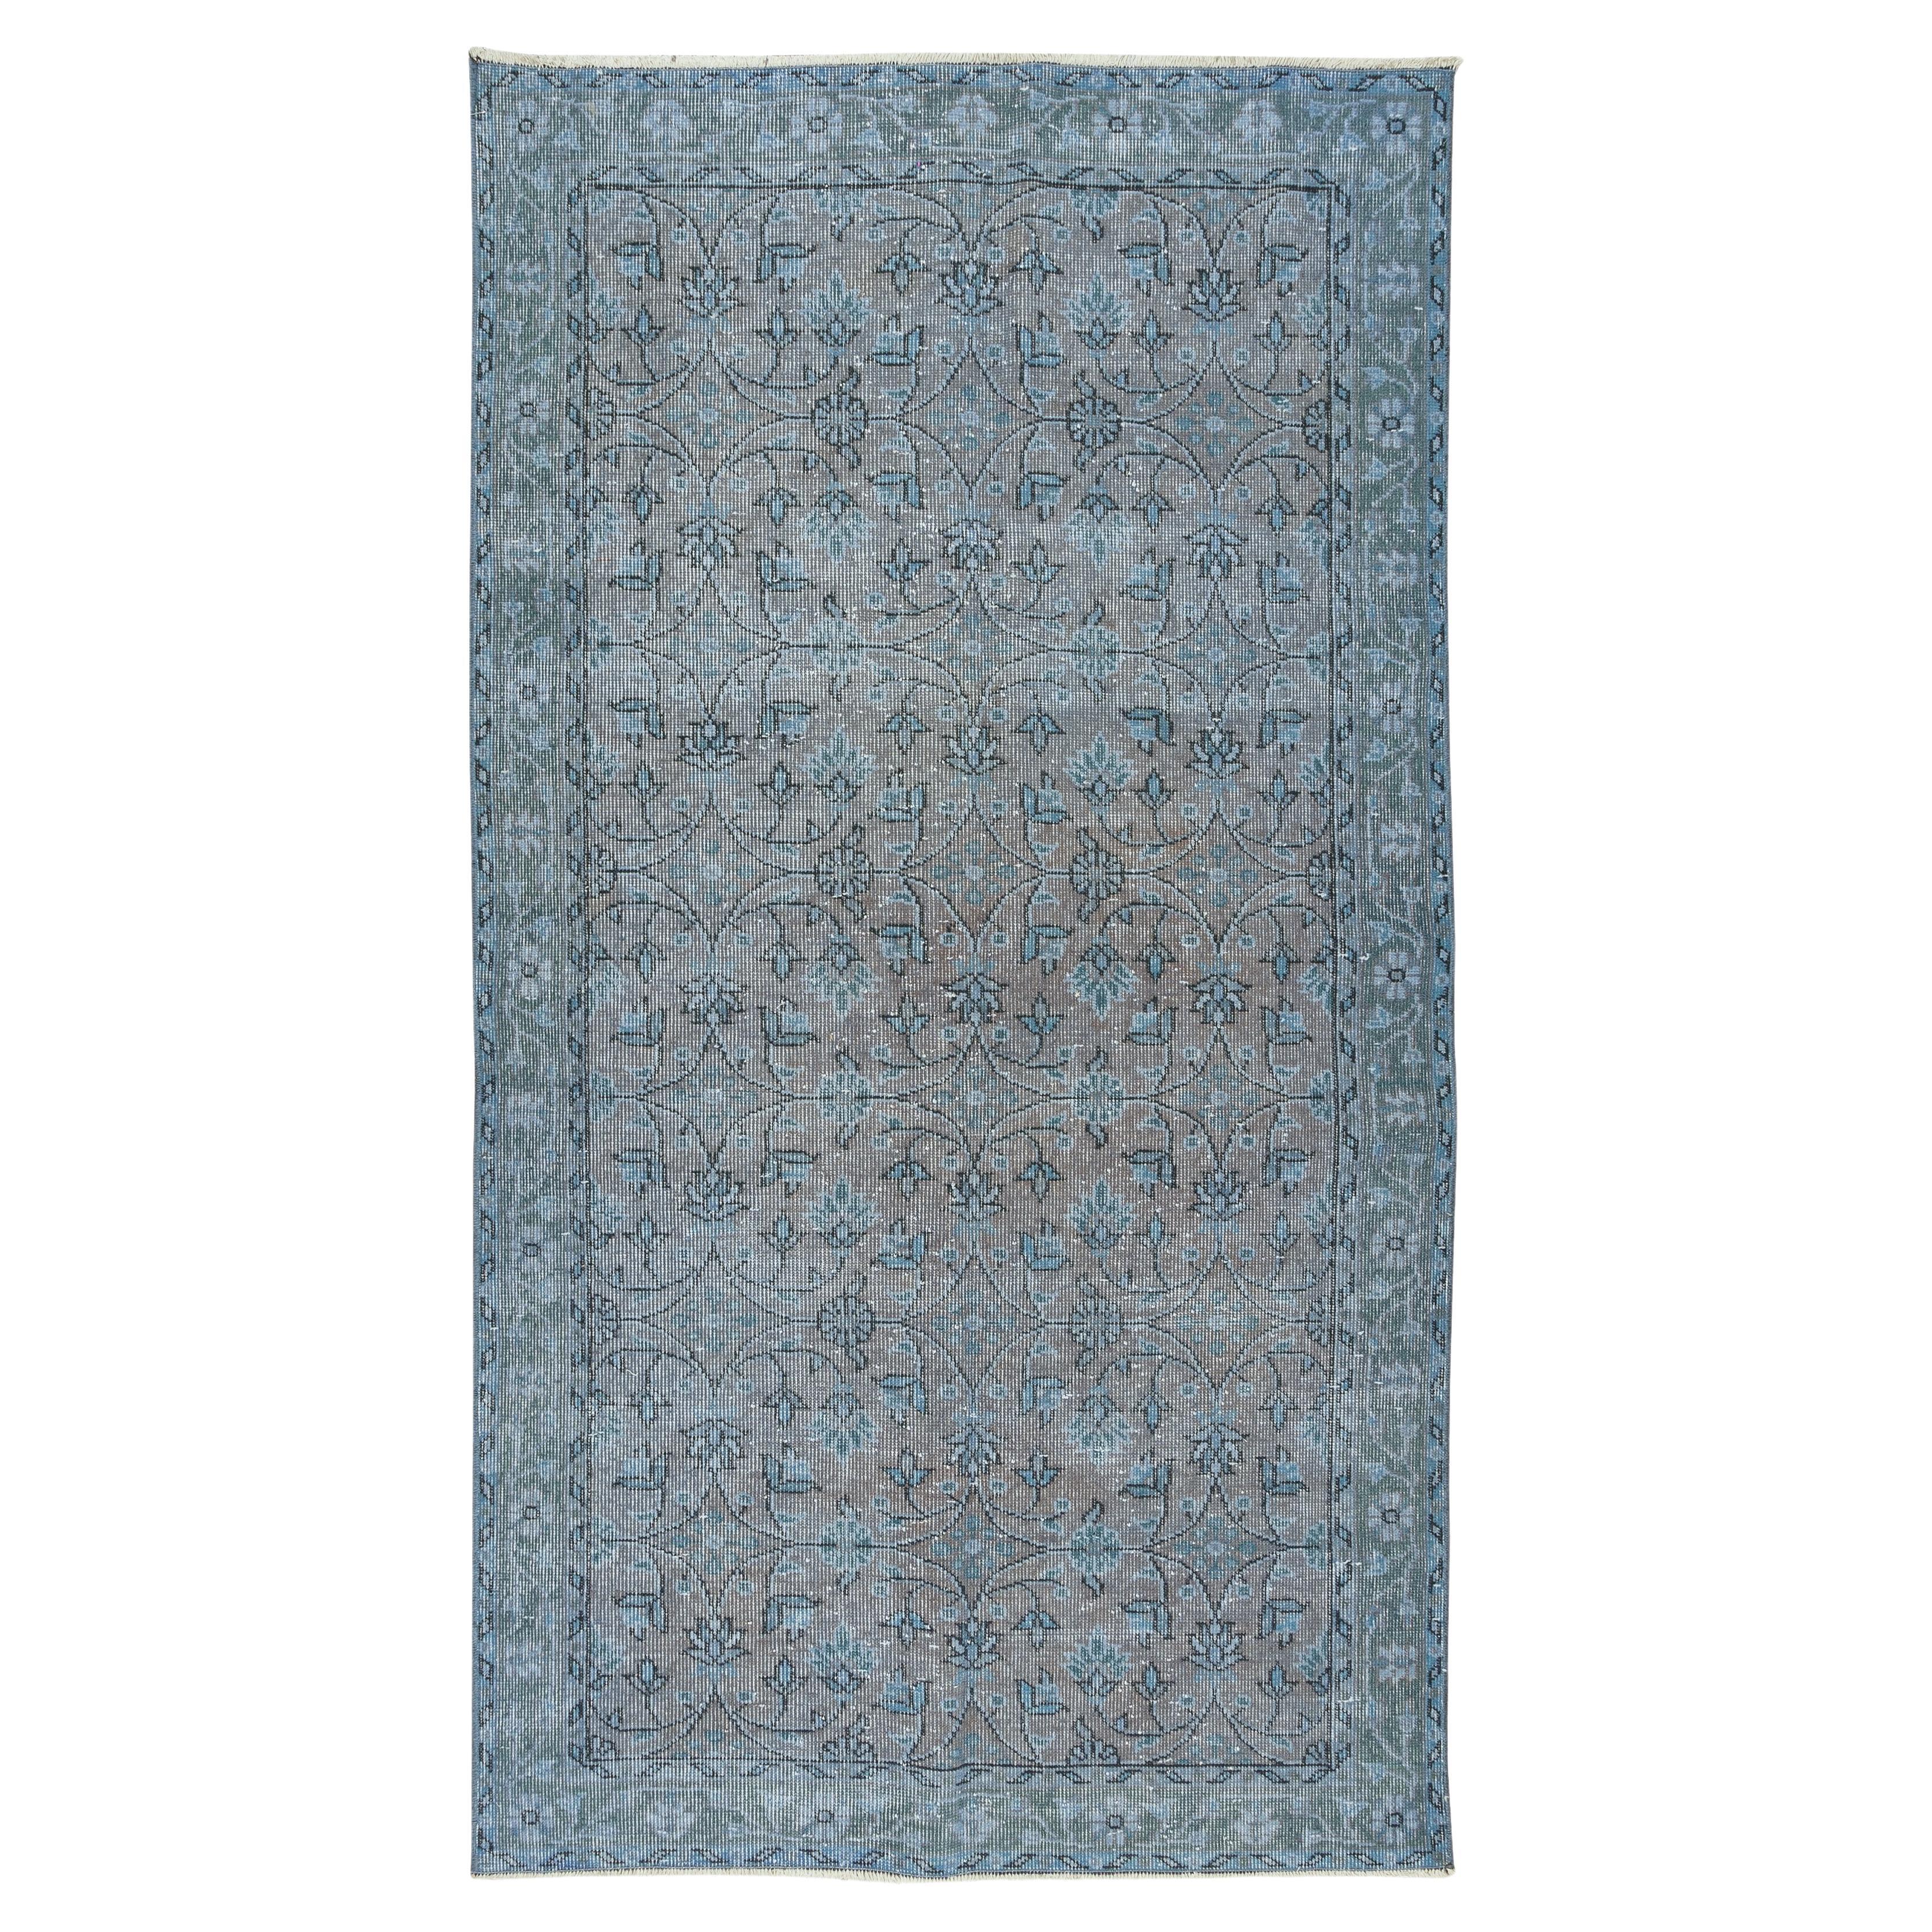 3.9x7.2 Ft Handmade Vintage Turkish Rug Re-Dyed in Blue, Ideal 4 Modern Interior For Sale